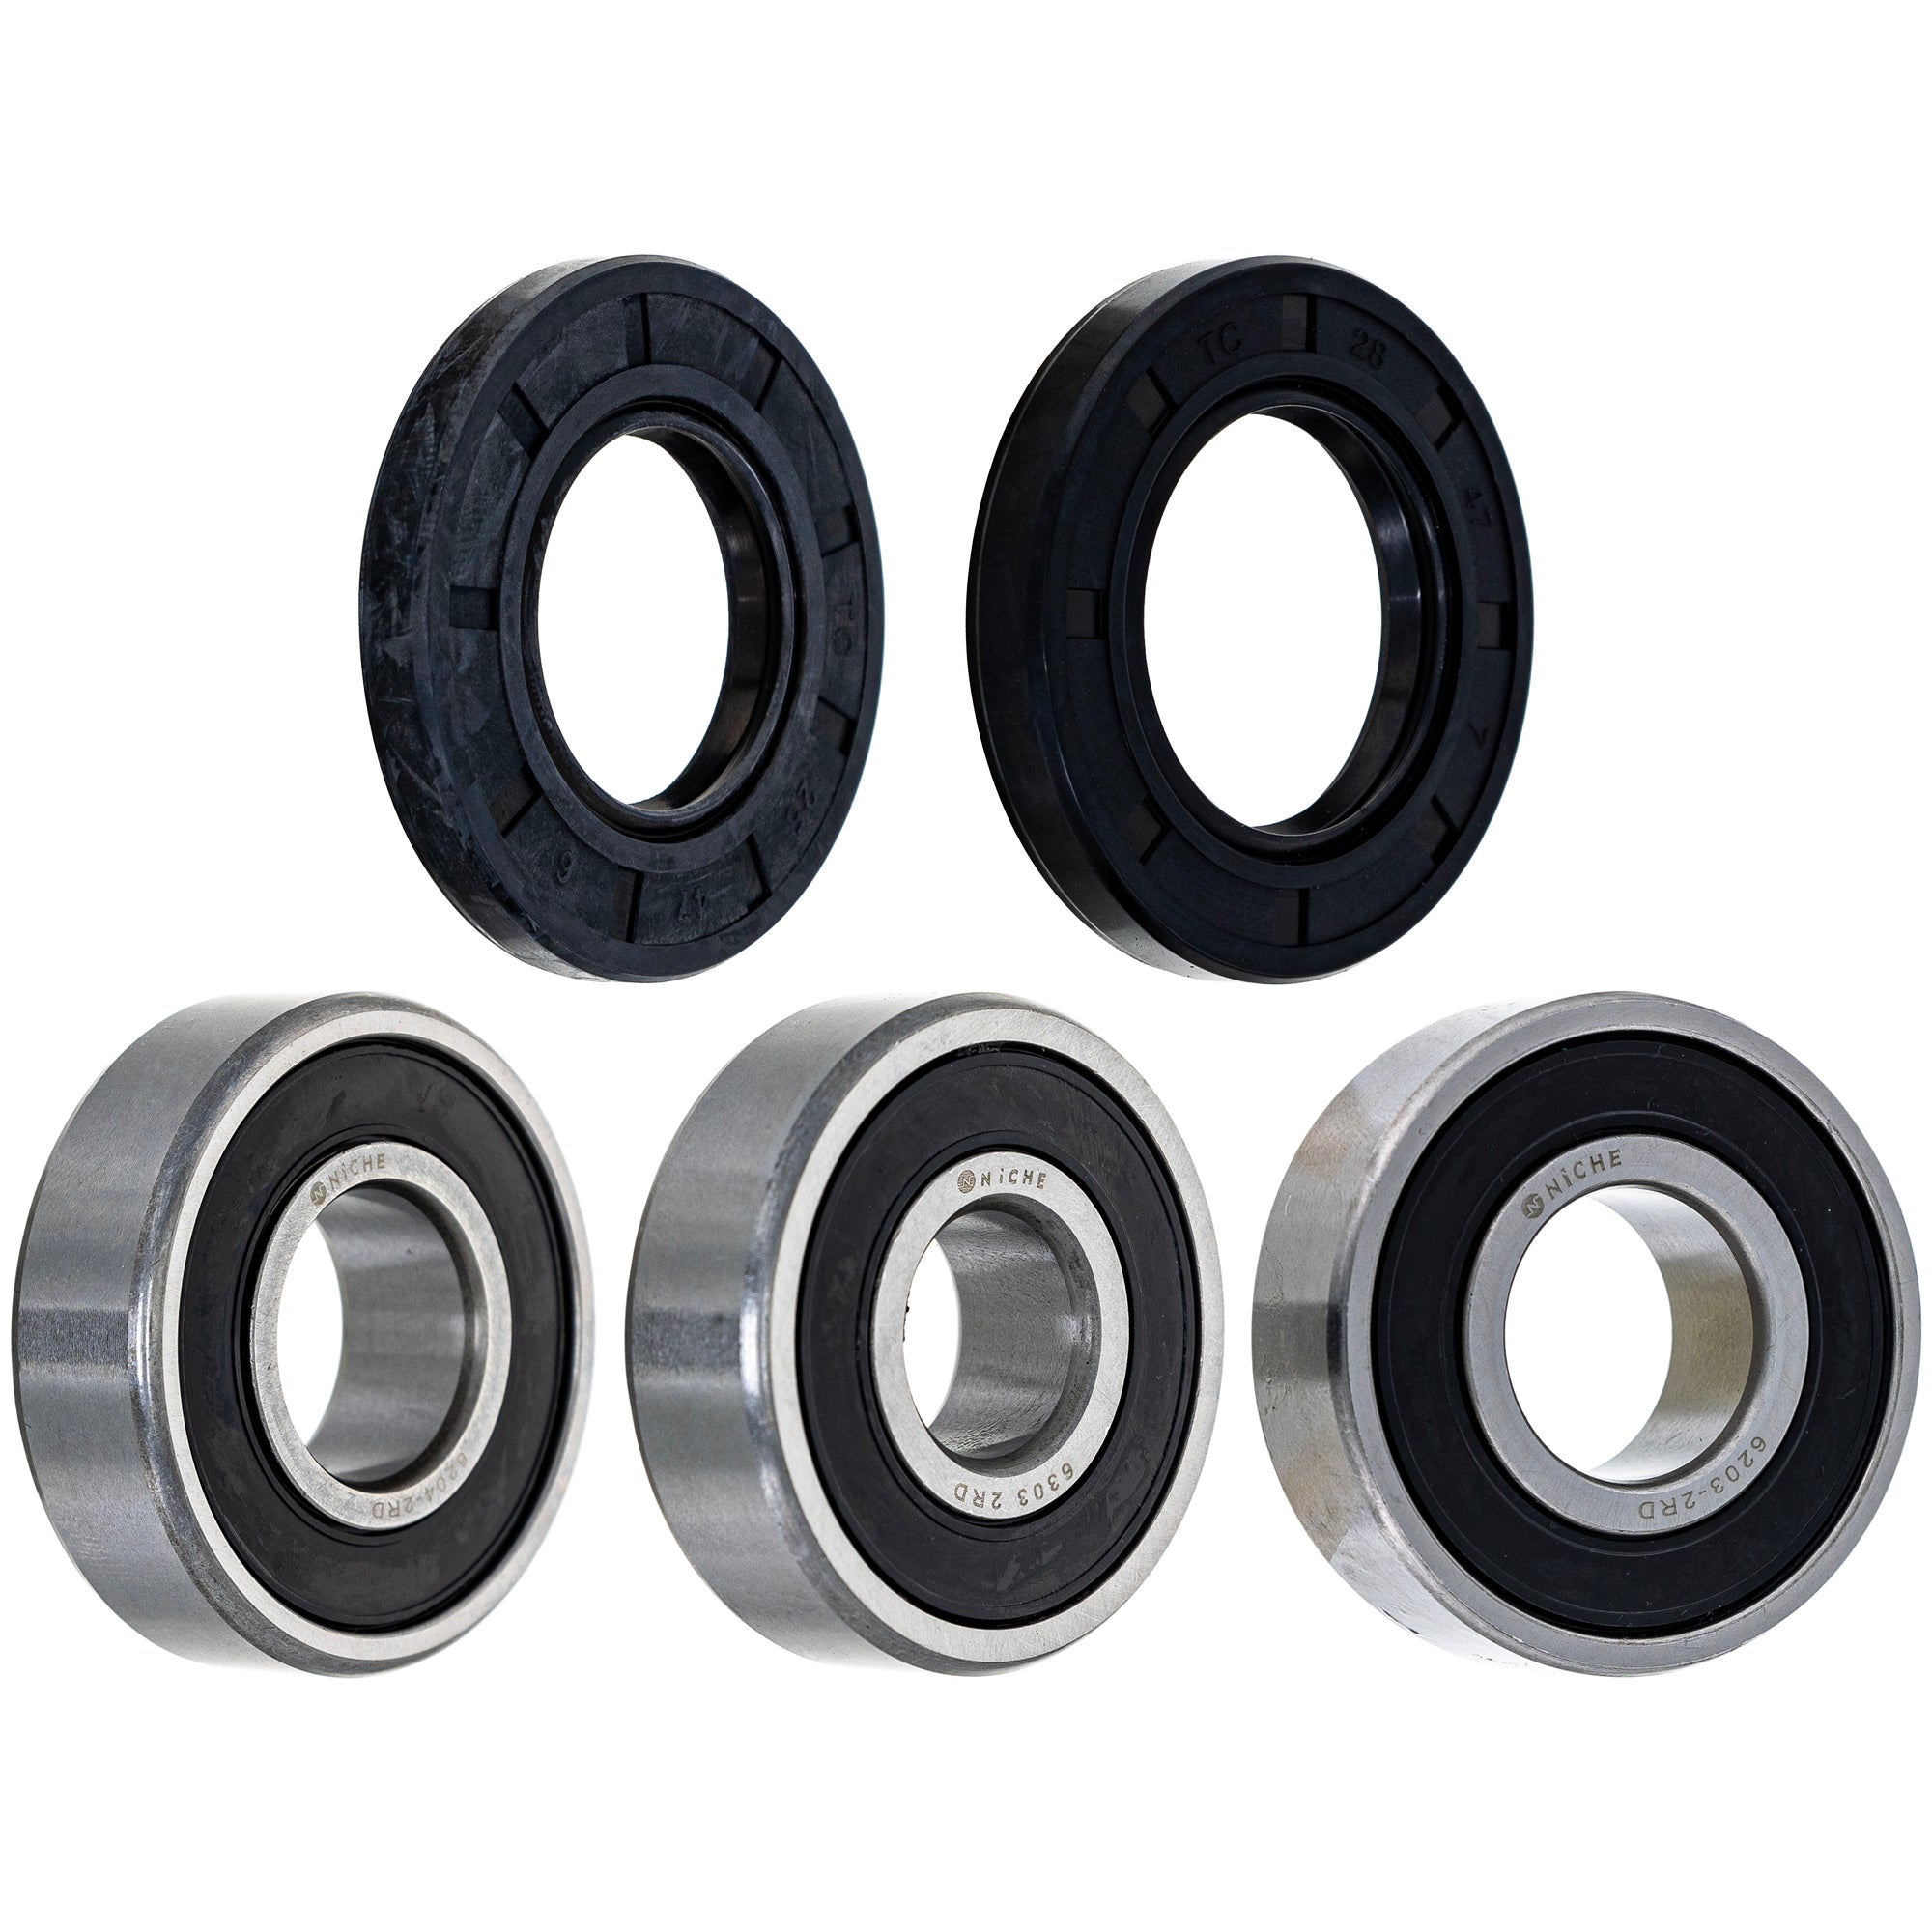 Wheel Bearing Seal Kit for zOTHER FZR400 NICHE MK1008829